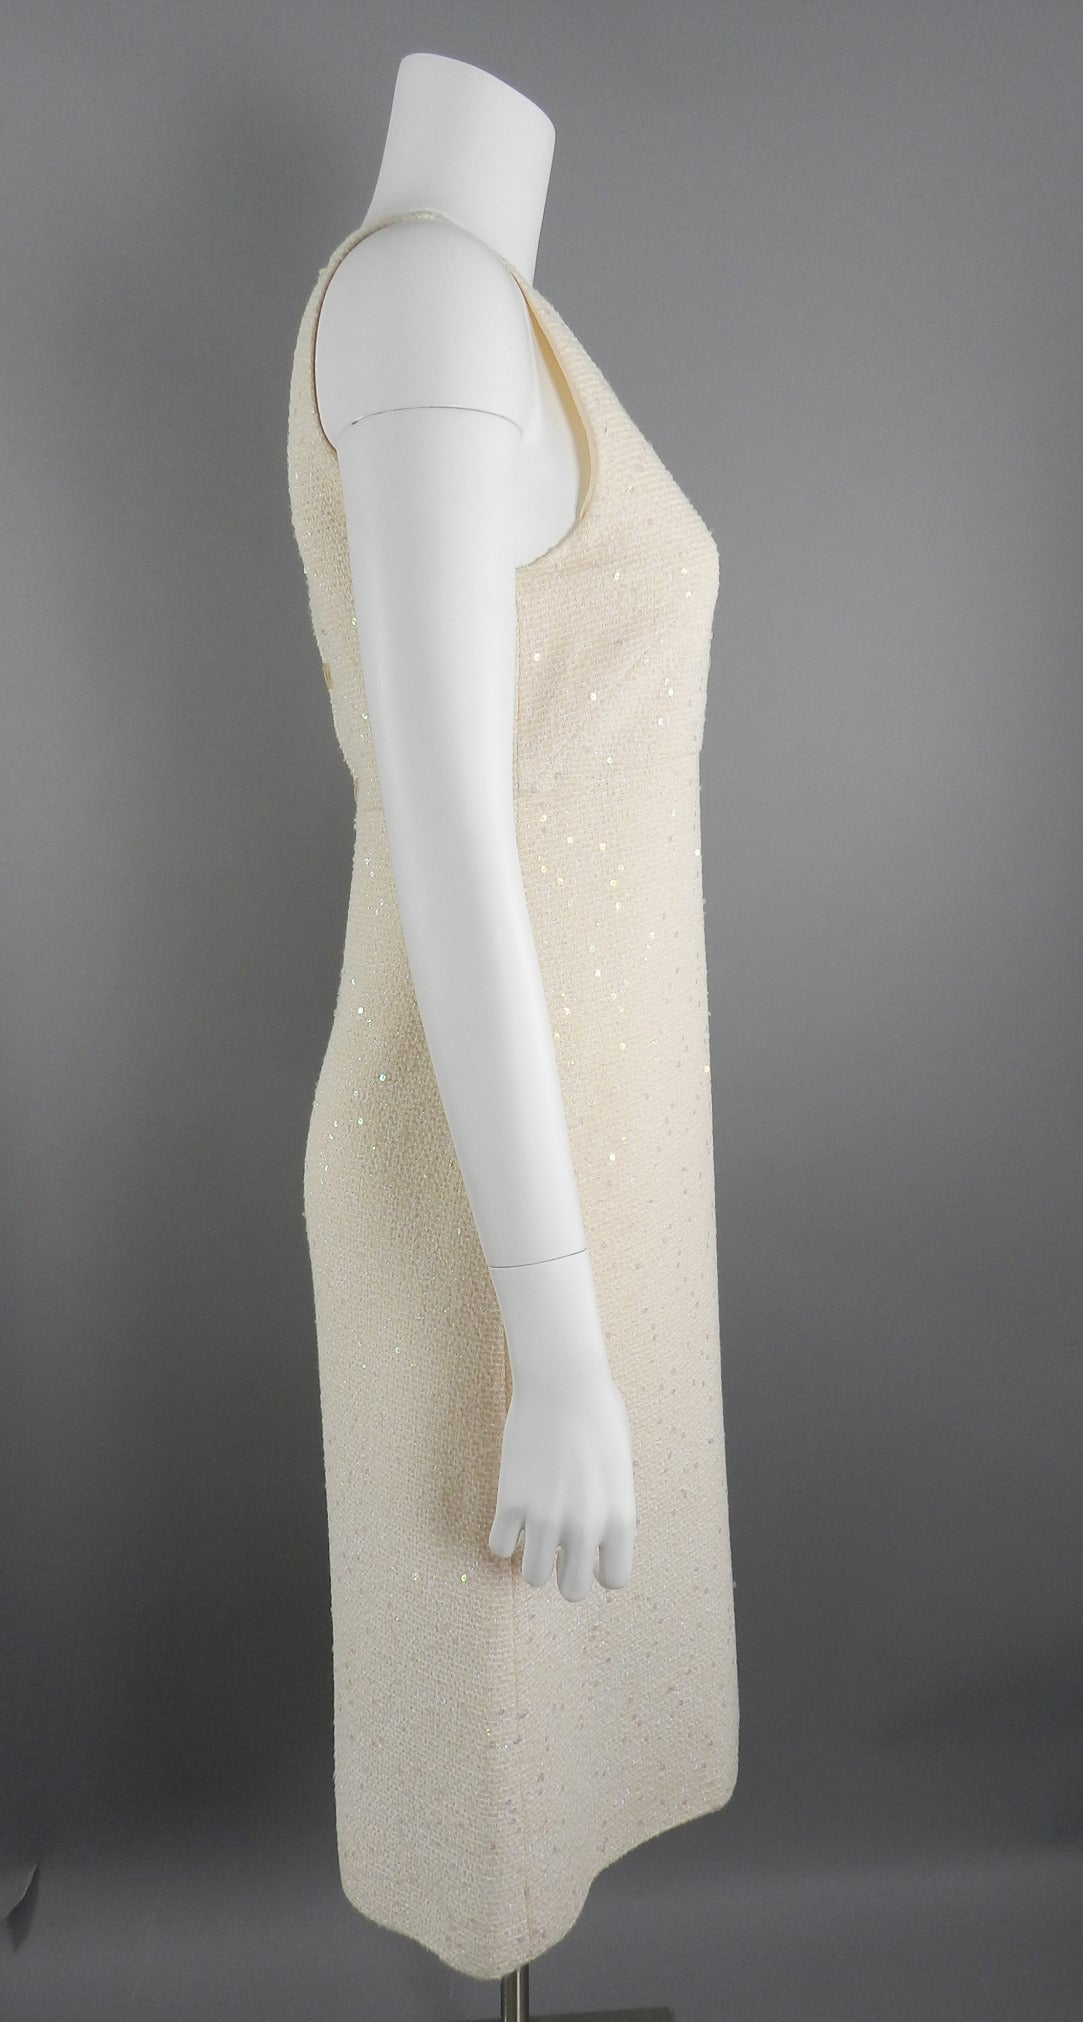 Chanel 2000 Cruise collection sleeveless shift dress. The dress is ivory with a hint of shell pink color. 5 clear CC buttons at back, zipper, and lined in silk. Excellent previously owned condition. Tagged size FR 38 (USA 4/6). To fit 33/34